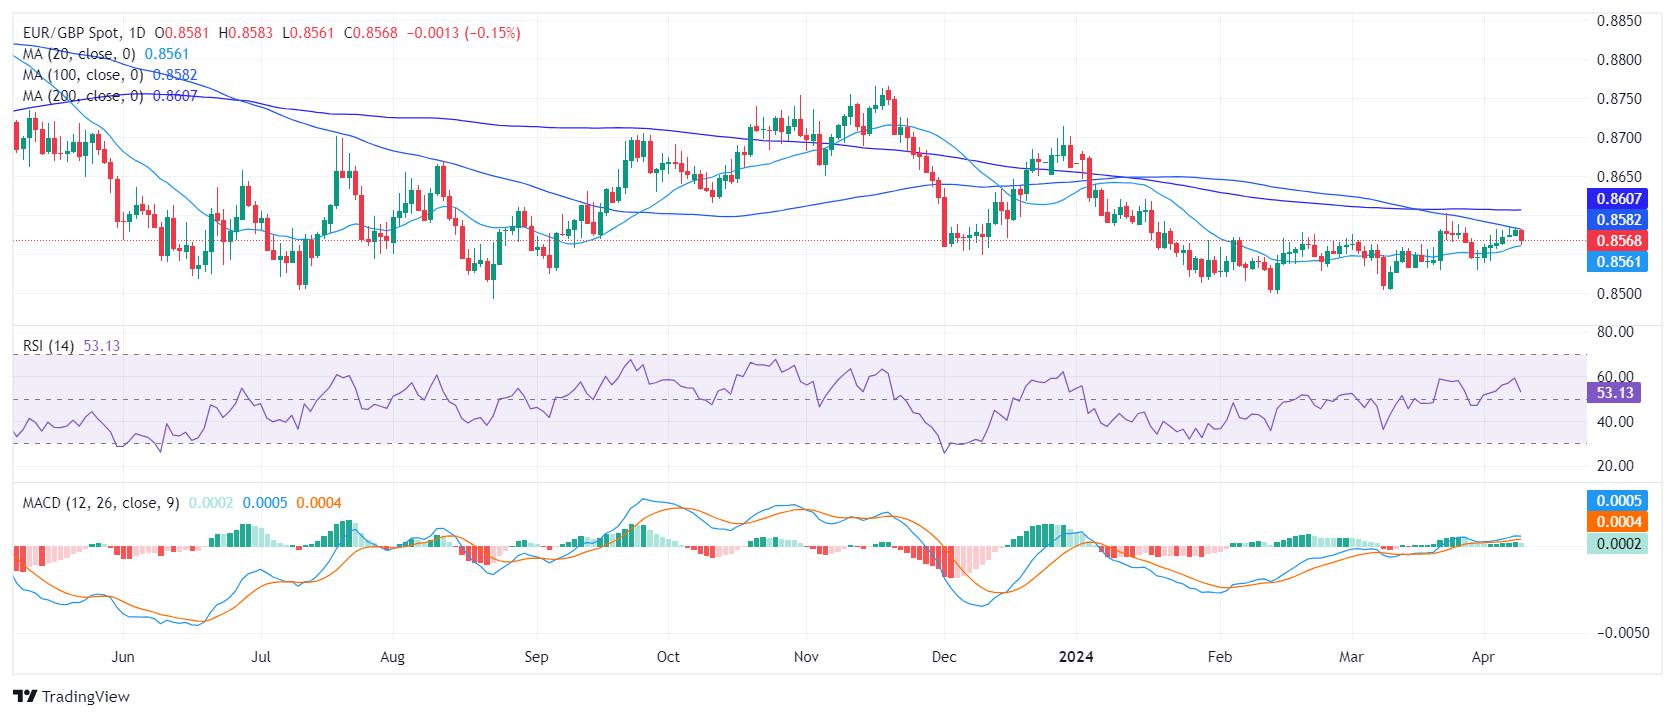 EUR/GBP Price Analysis: Bulls meet strong resistance at the 100-day SMA